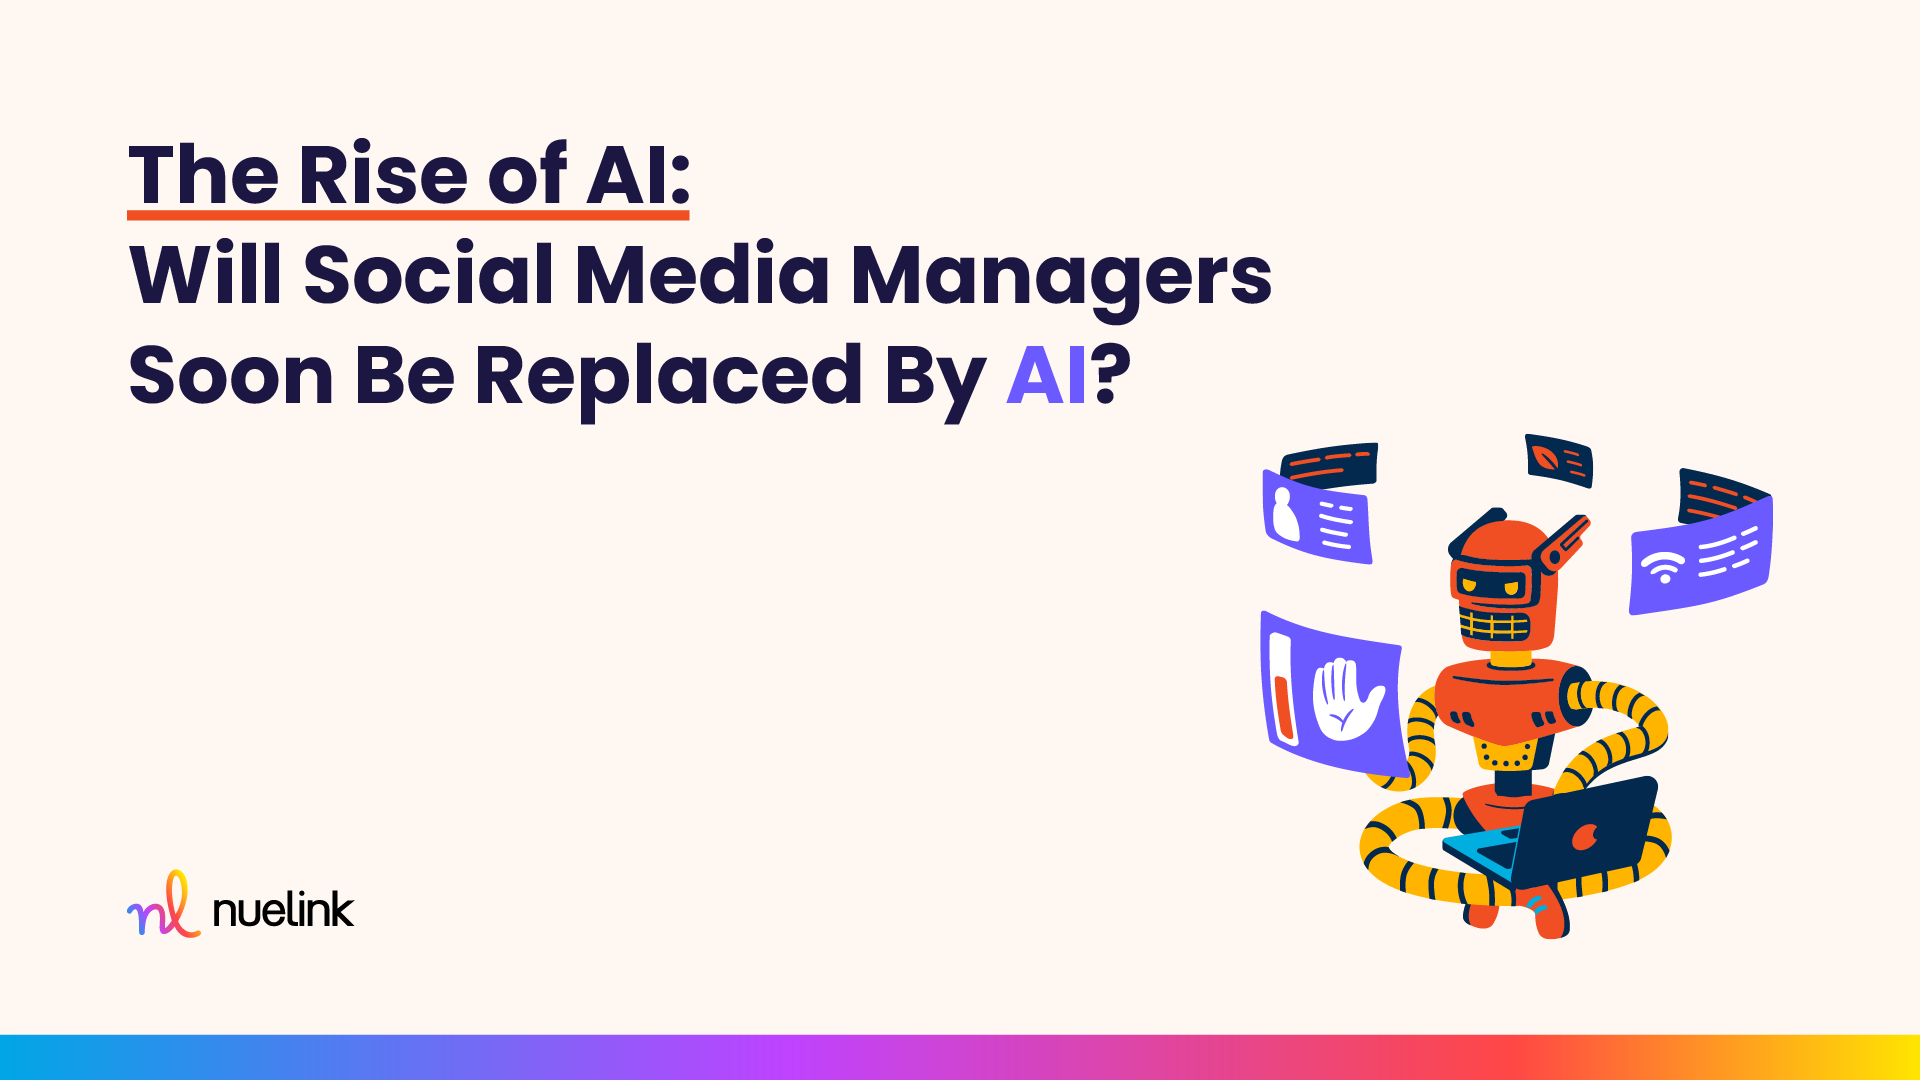 How AI will affect social media managers